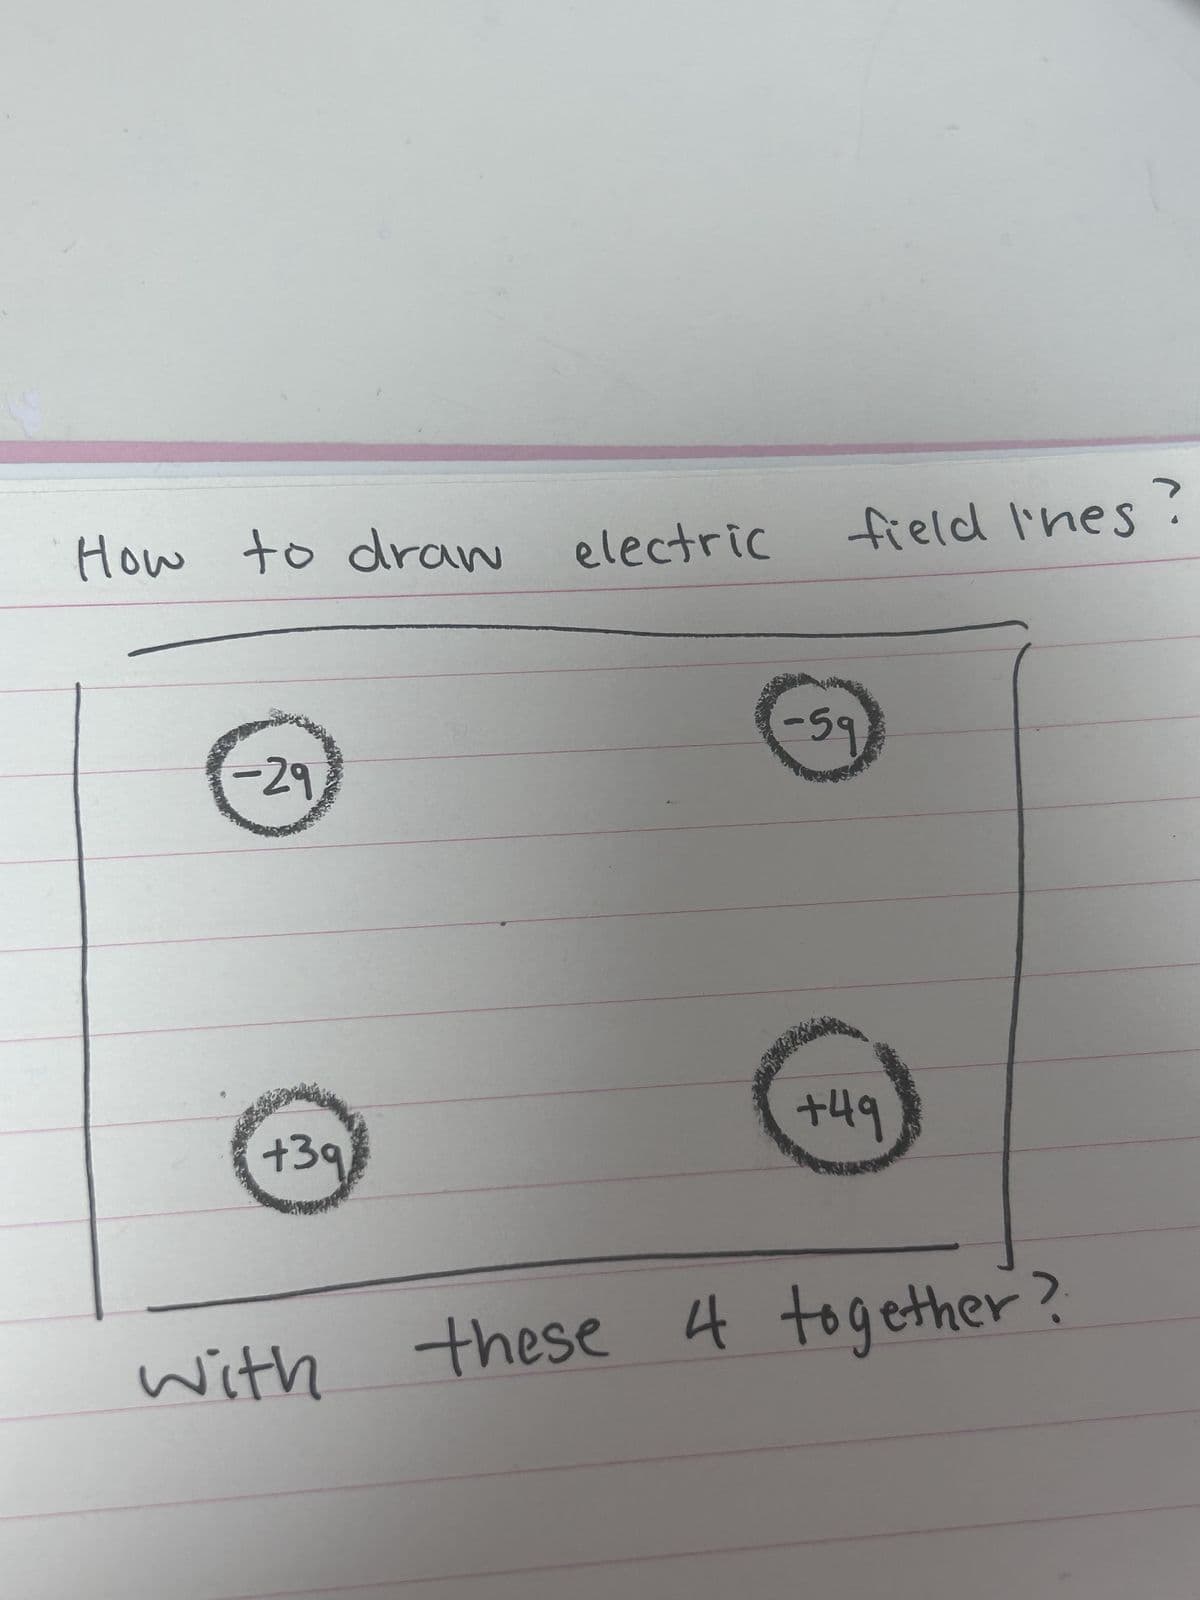 How to draw
-29
+39
electric field Ines
?
-59
+49
with these 4 together?